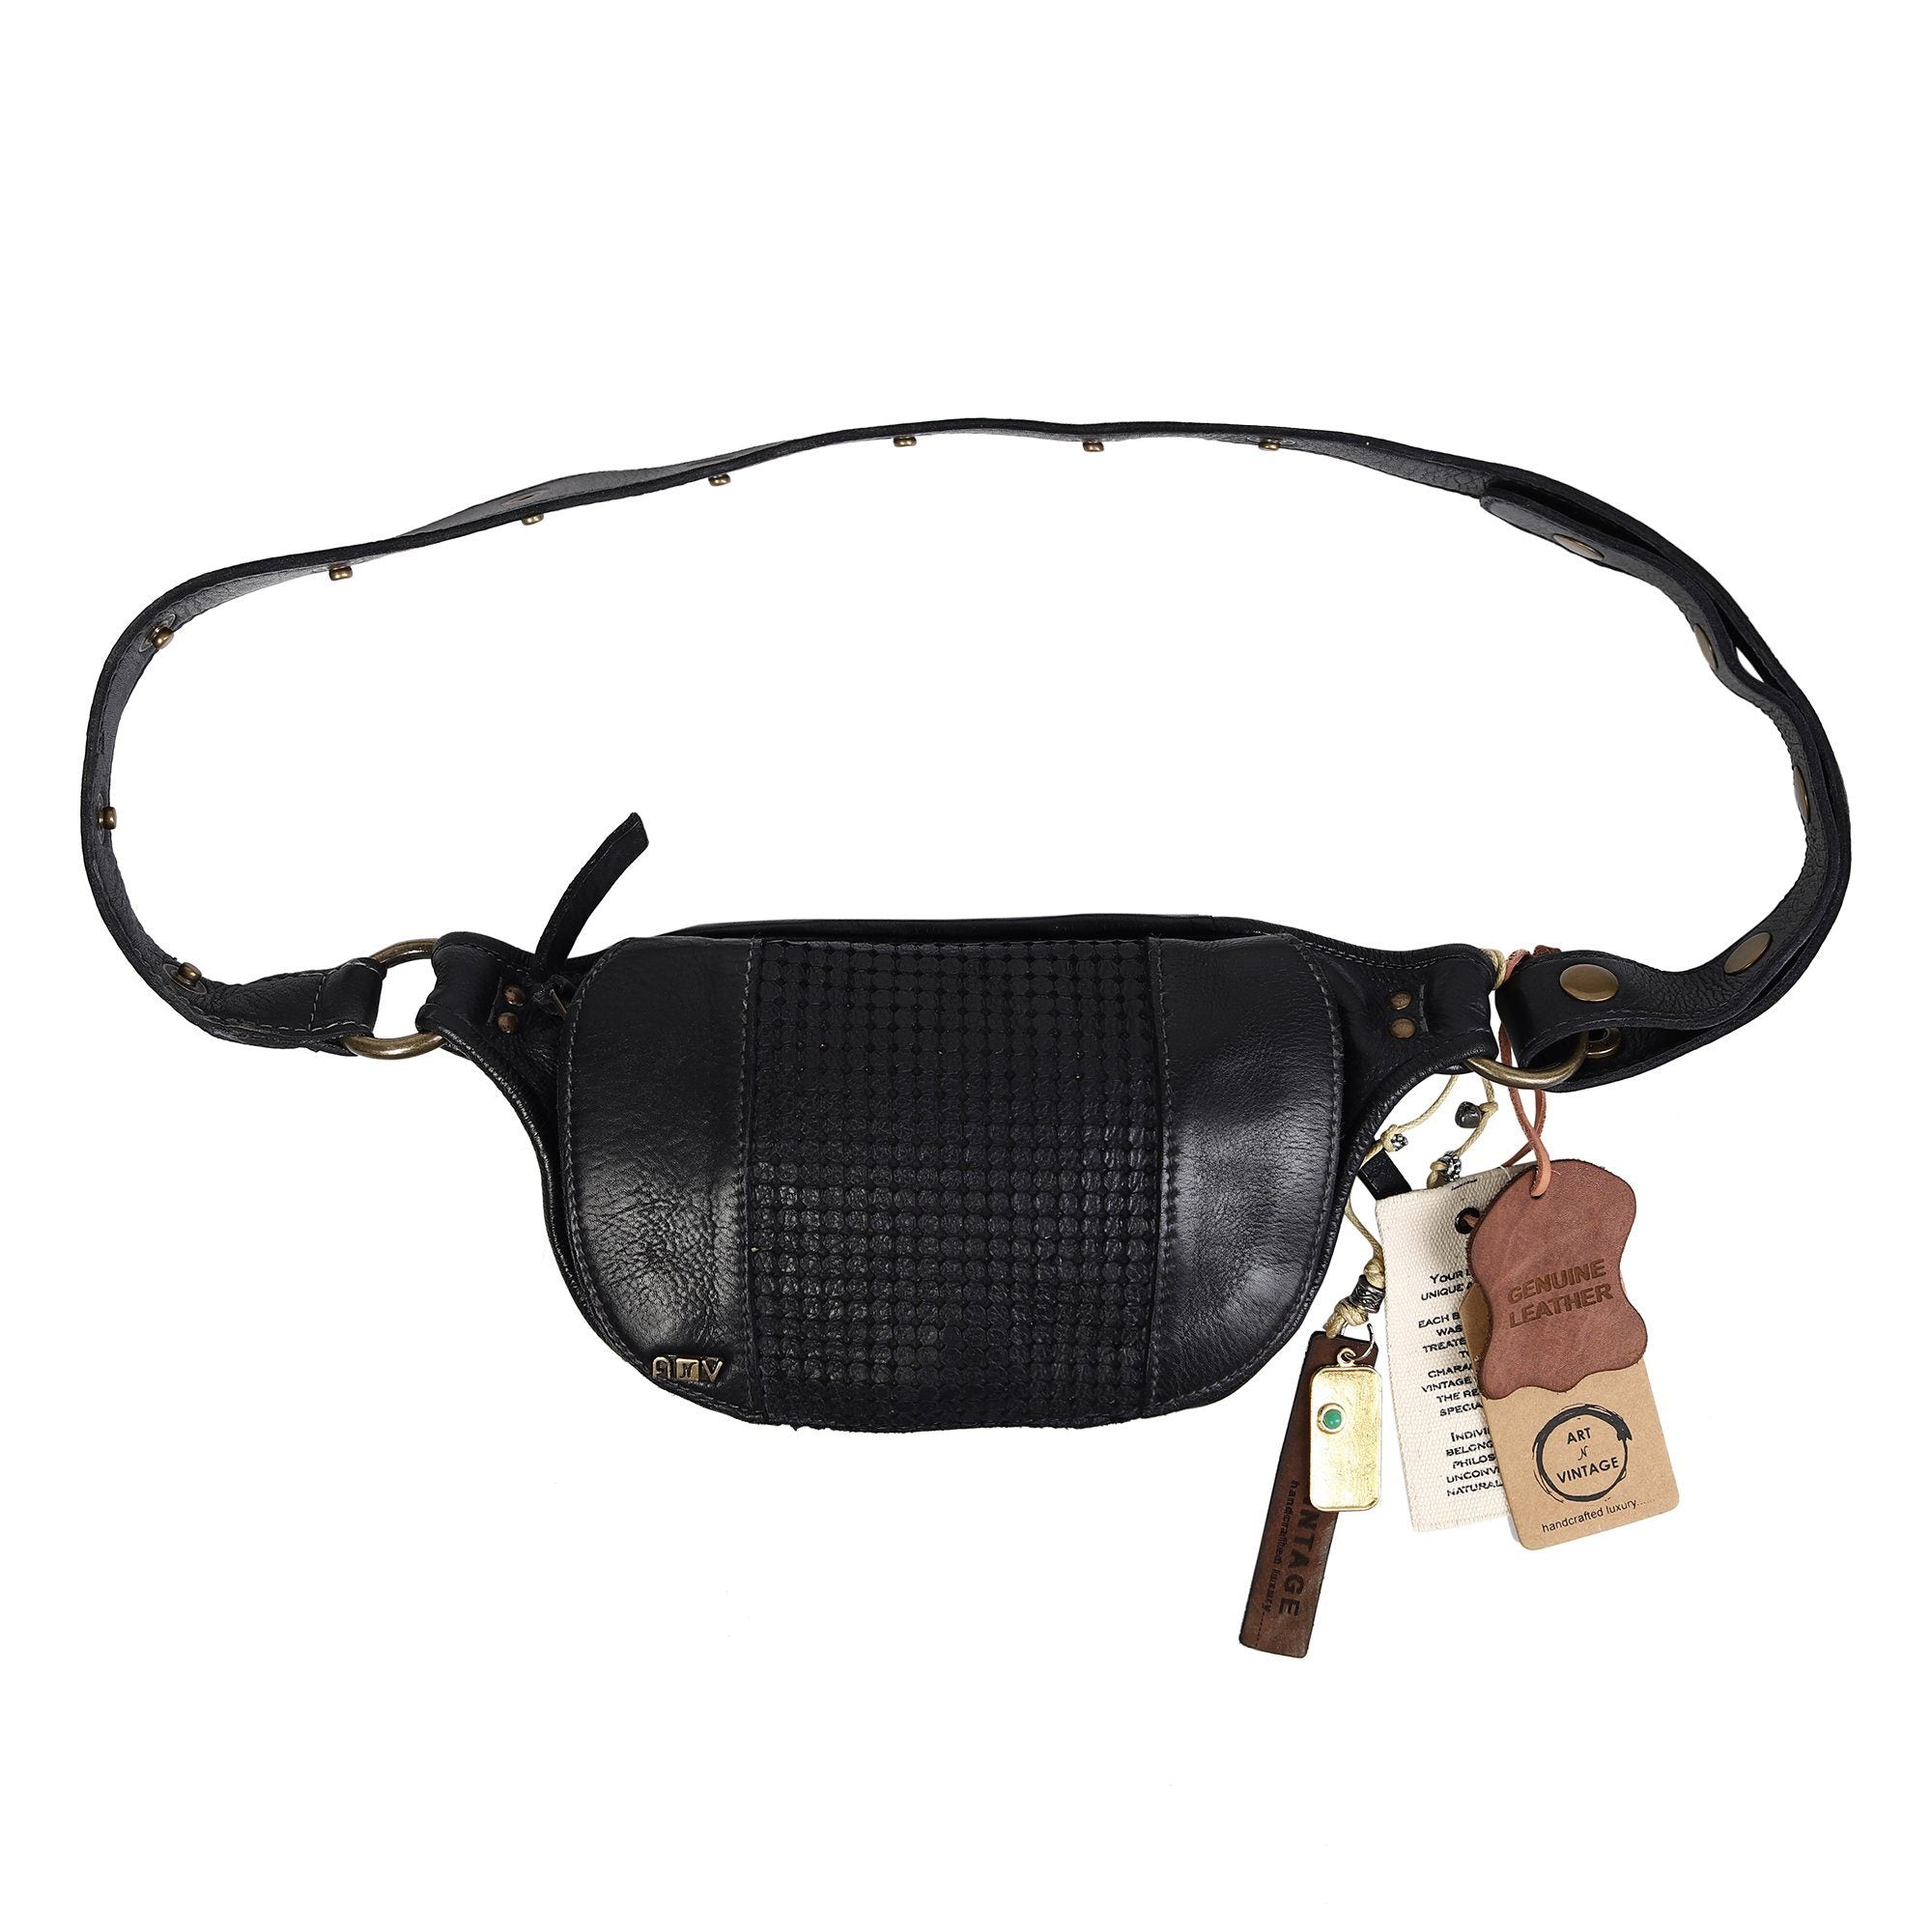 Rover Designer Bag:  Black leather waist pouch with perforation by Art N Vintage